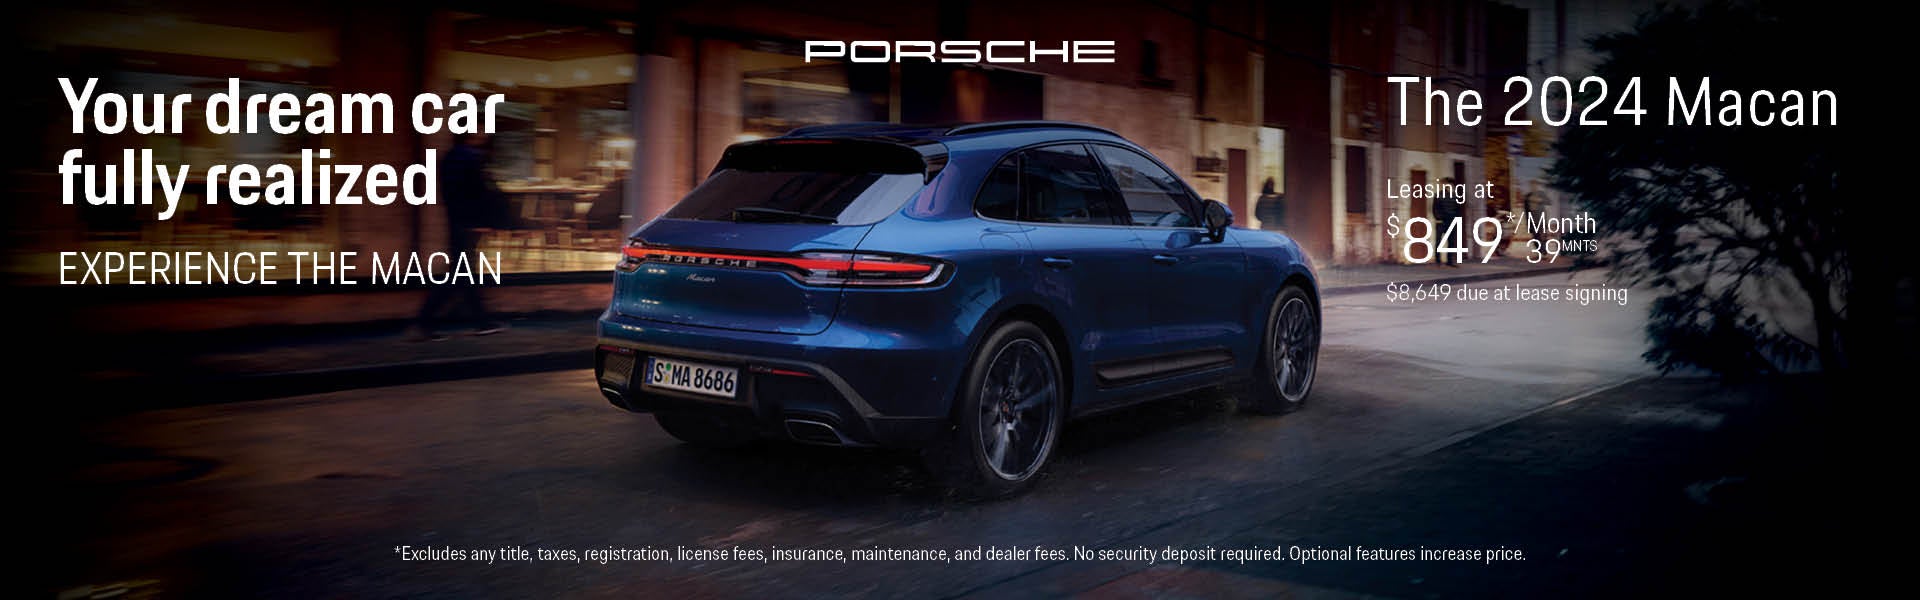 2024 Macan Lease